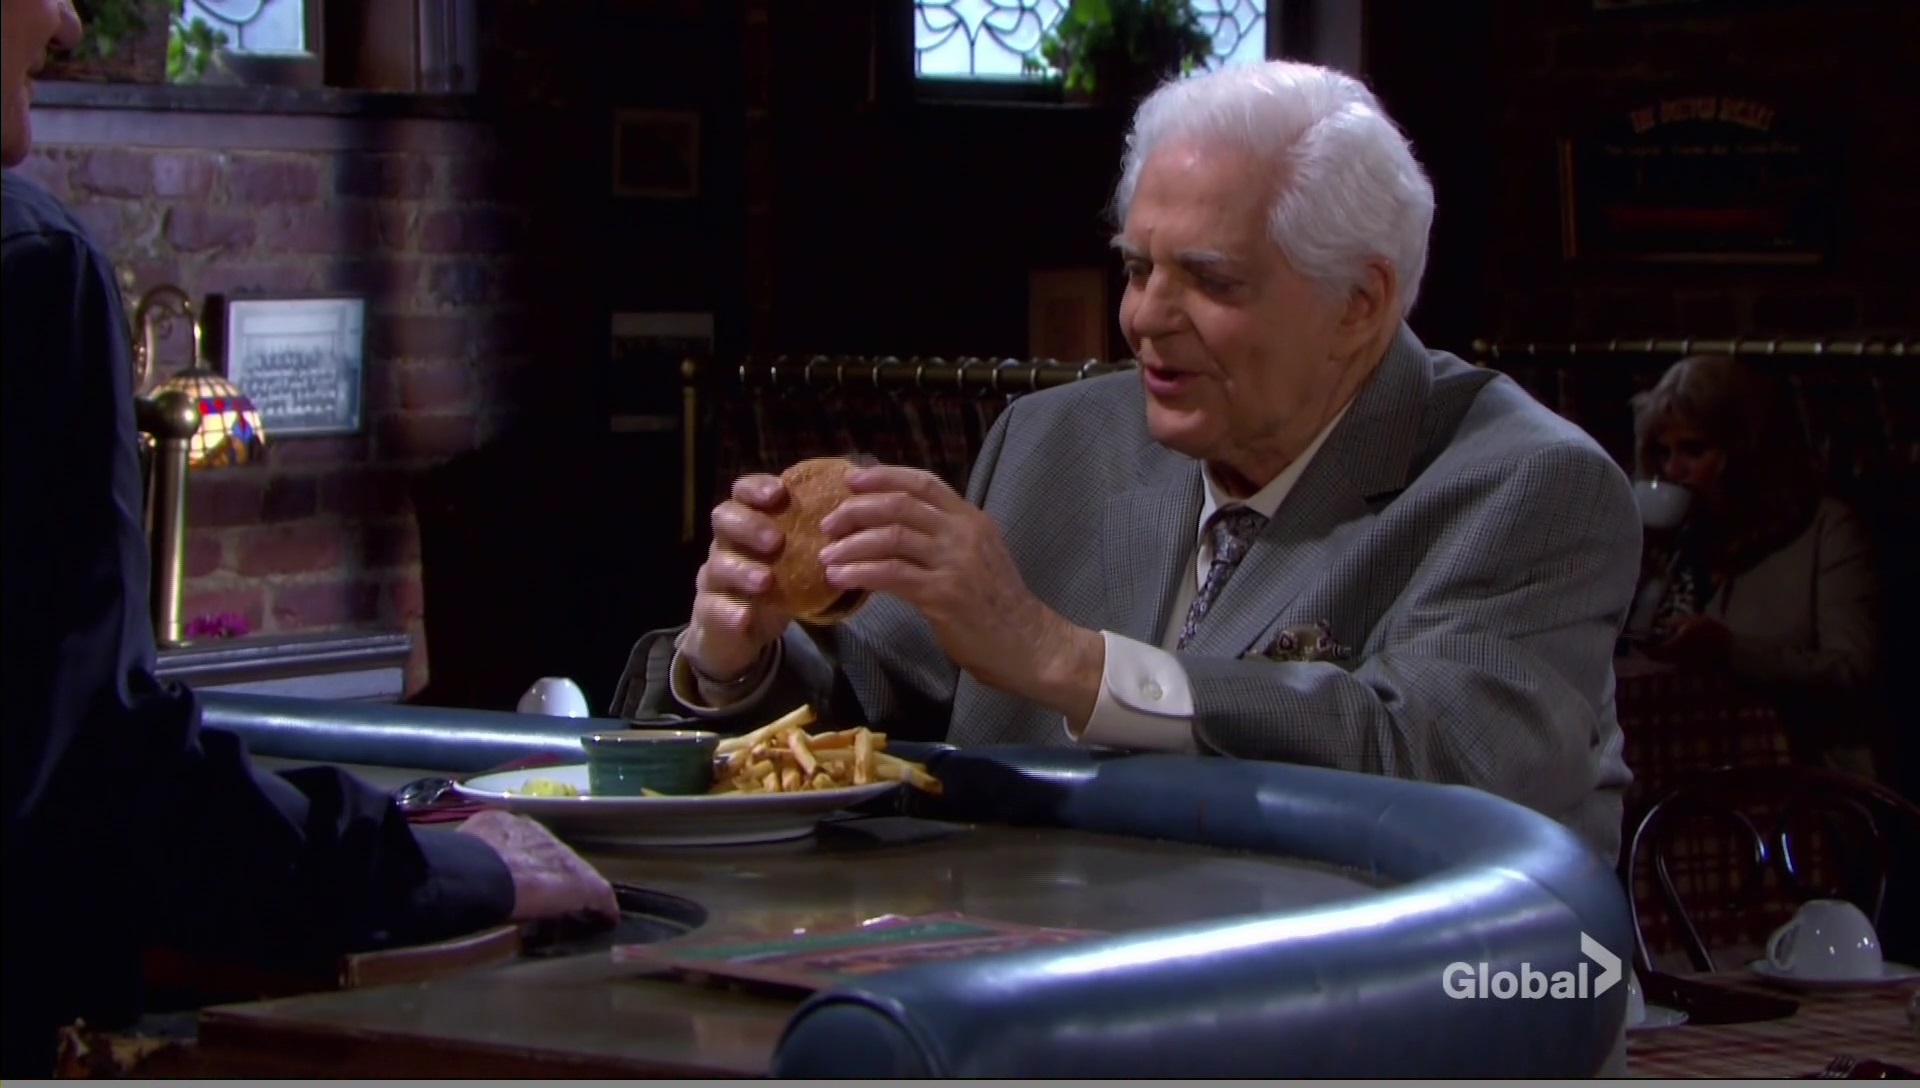 doug eat burger days of our lives